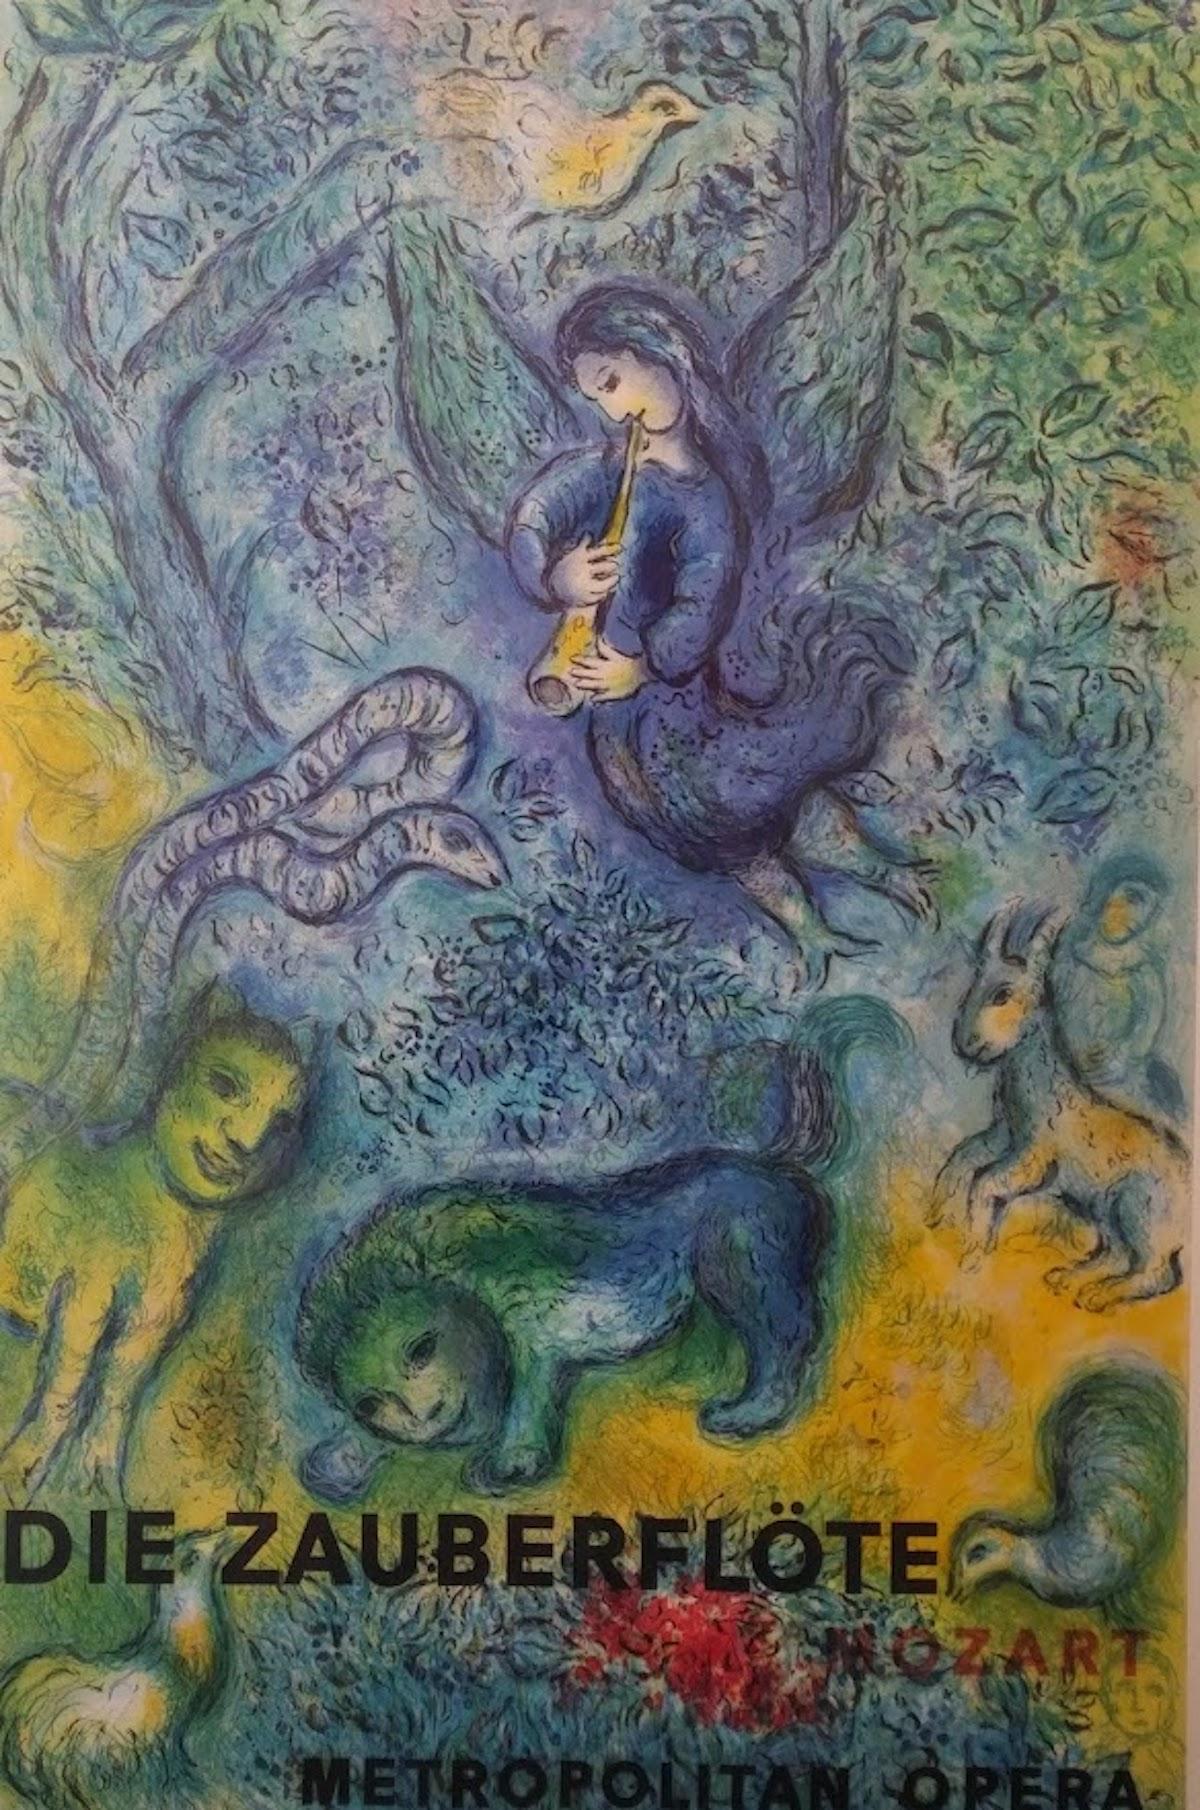 Marc Chagall Die Zauberflote, Original Lithograph Poster by Mourlot France, 1966